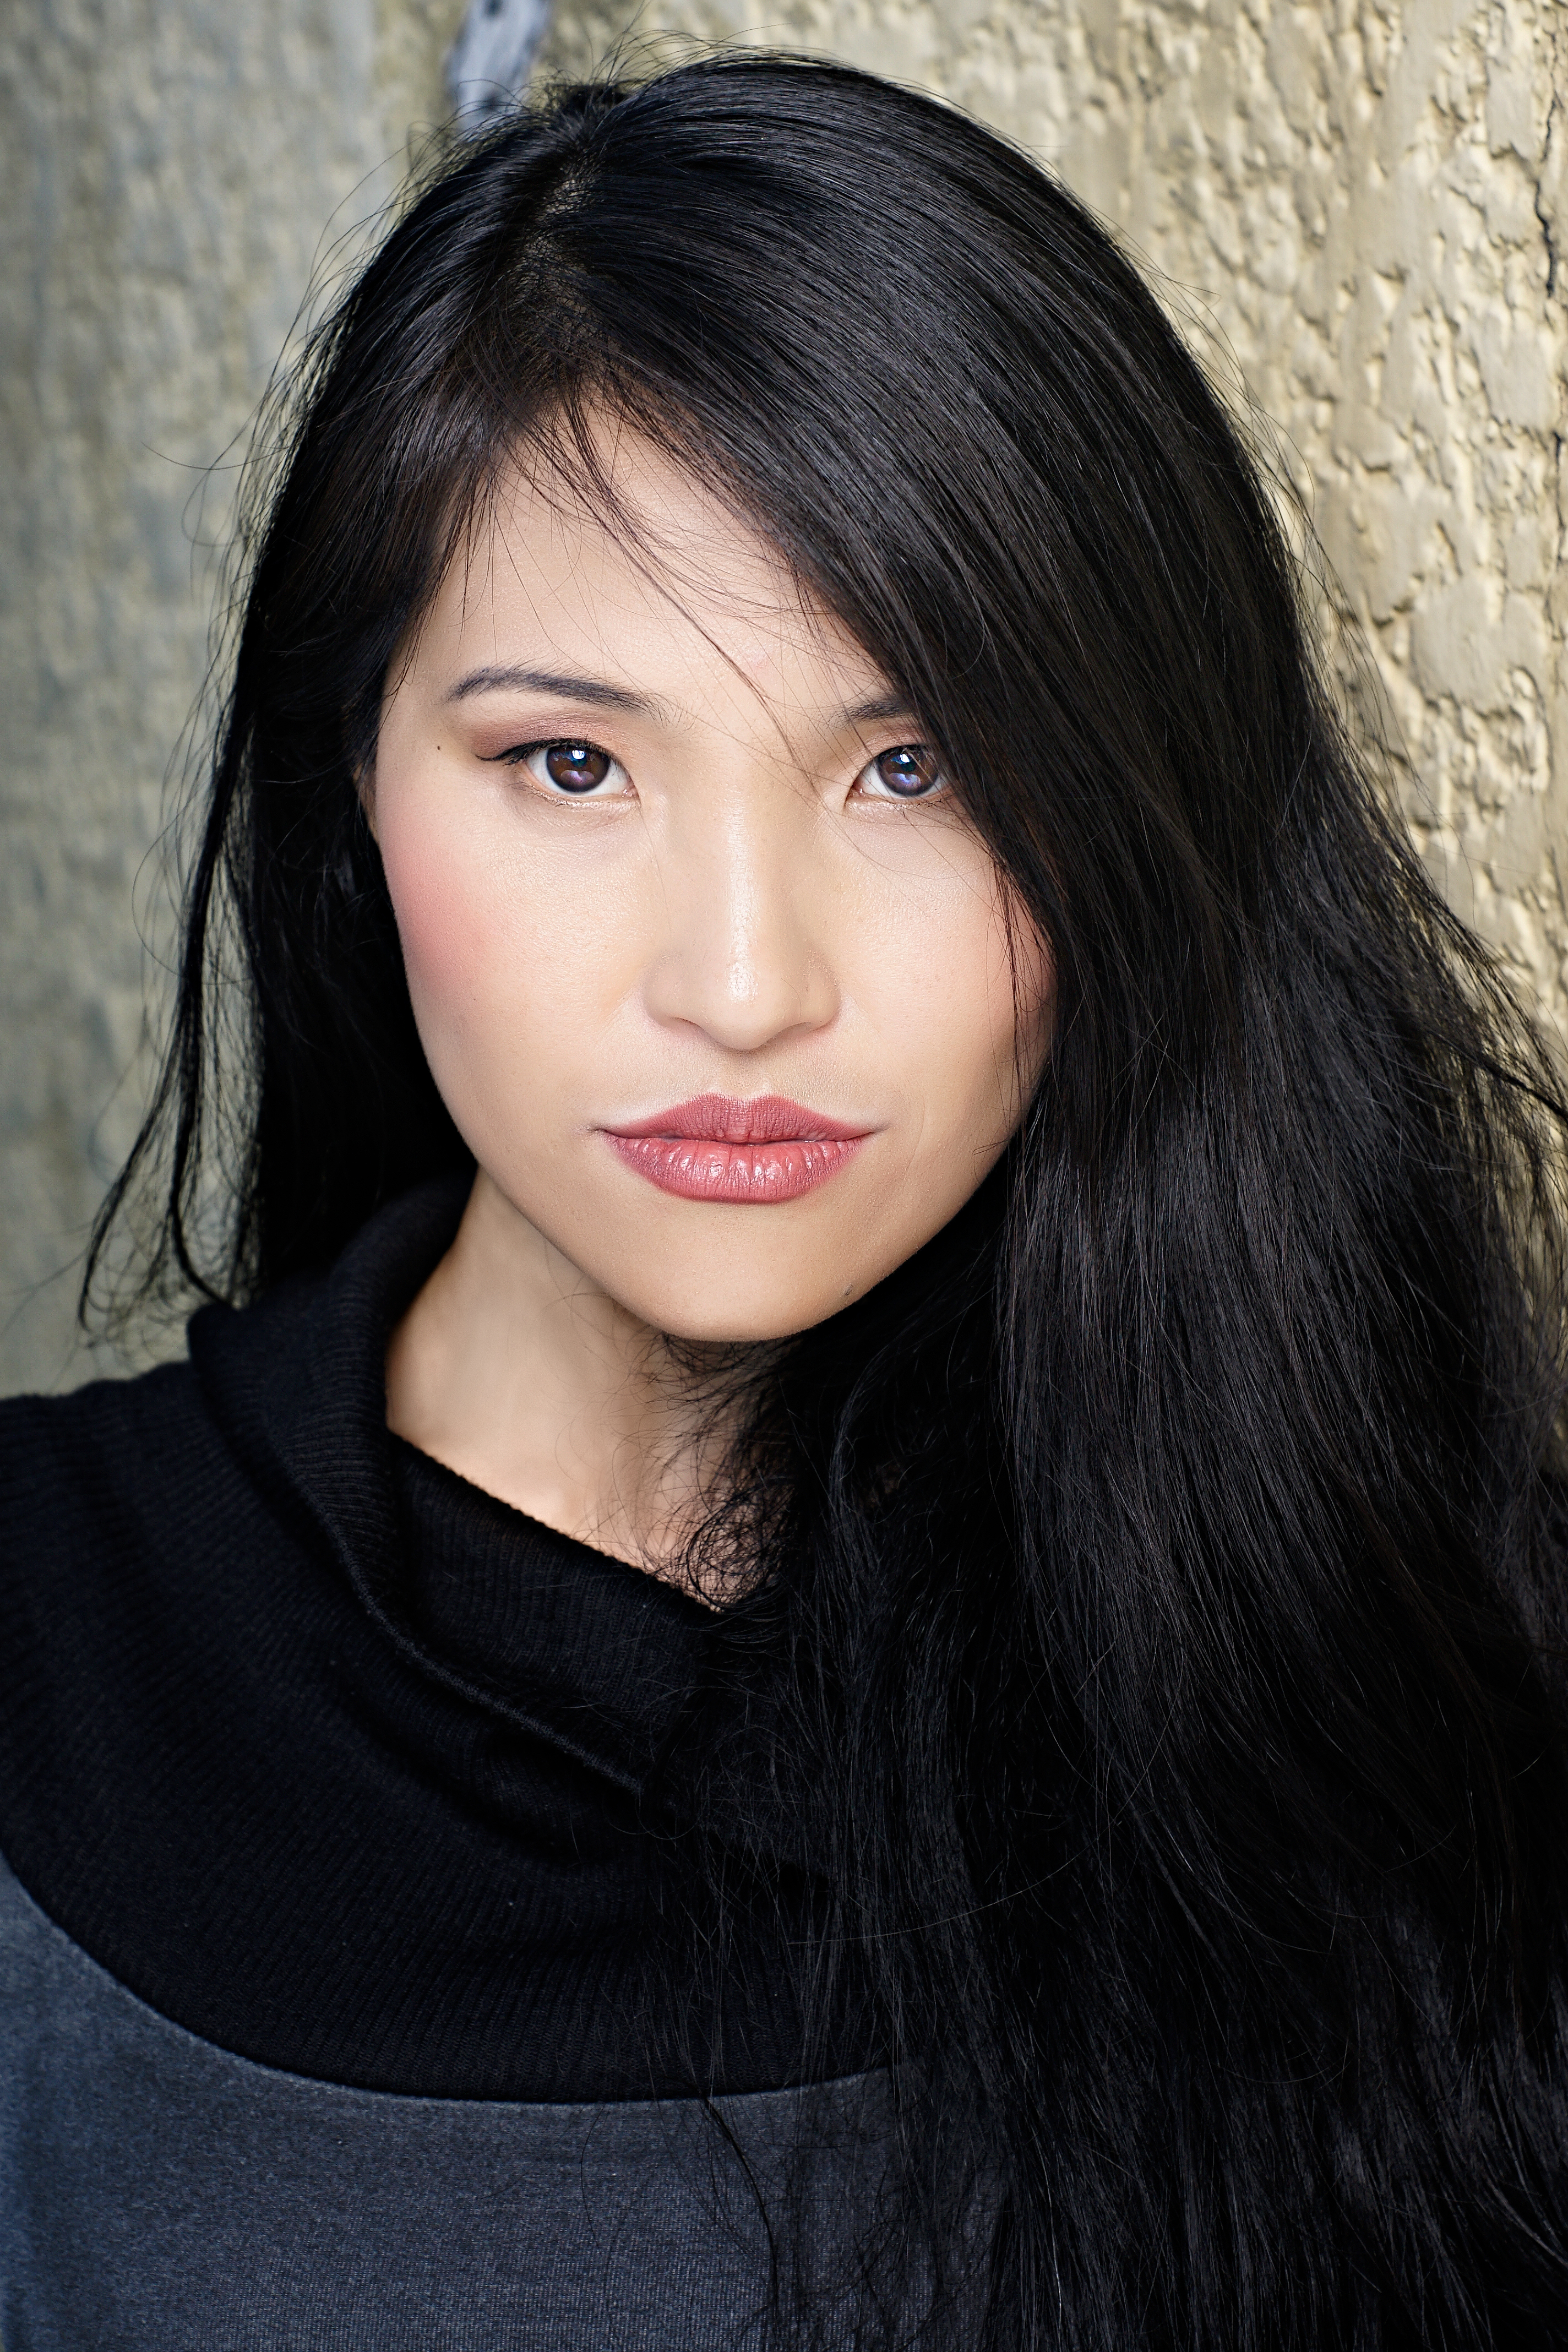 Lai Peng Chan Actress Film and TV Westend Girl Australia Mine Feline Eyes We Color The World by Anthony Byron